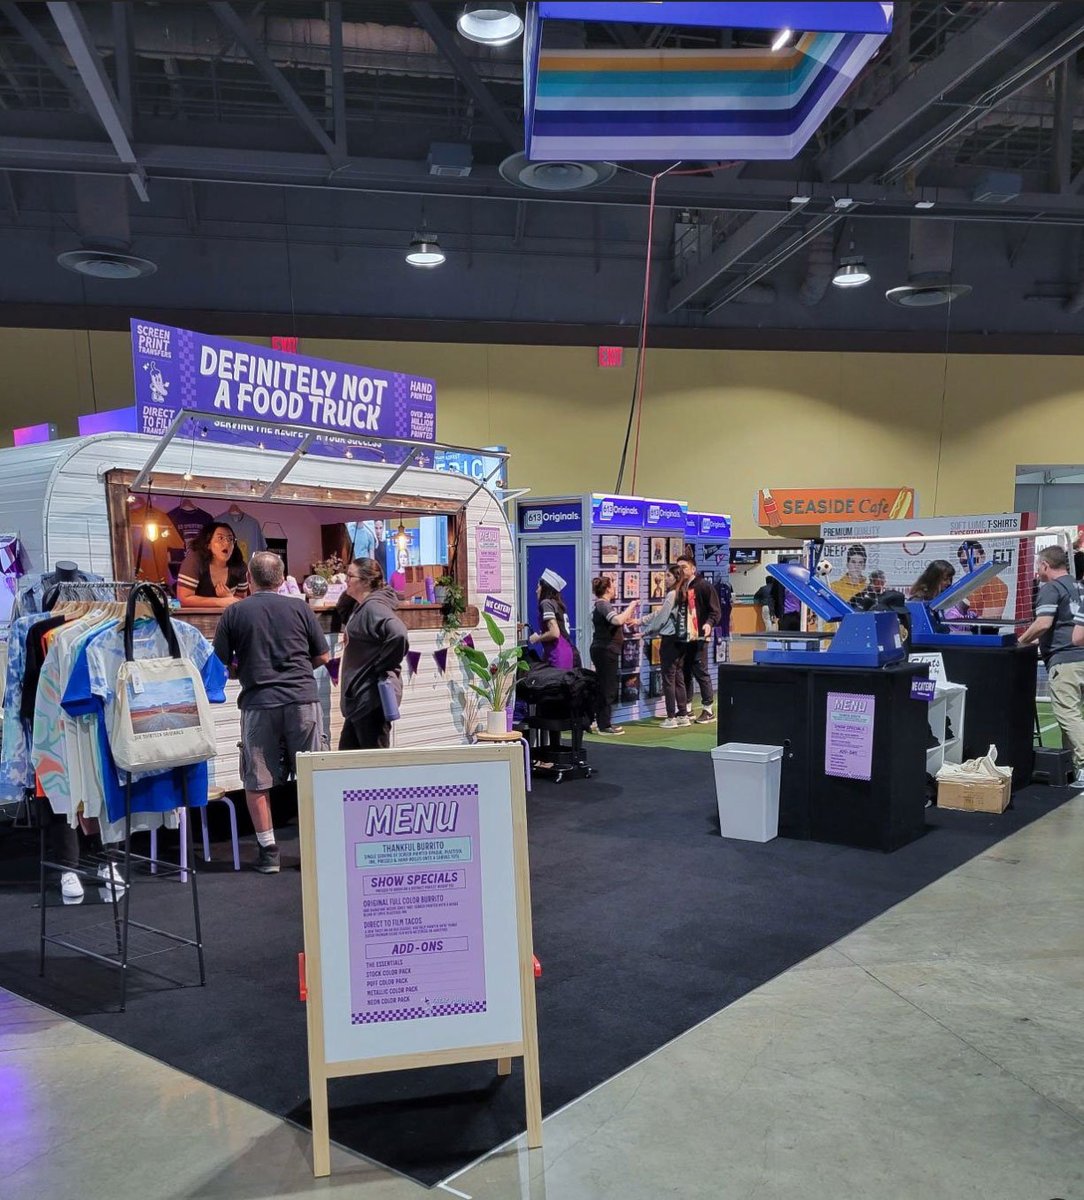 A full look at our booth. A menu board is visible in front with all of the giveaway options. Behind it is our food truck and soccer area. Within the space are mannequins and garment racks.